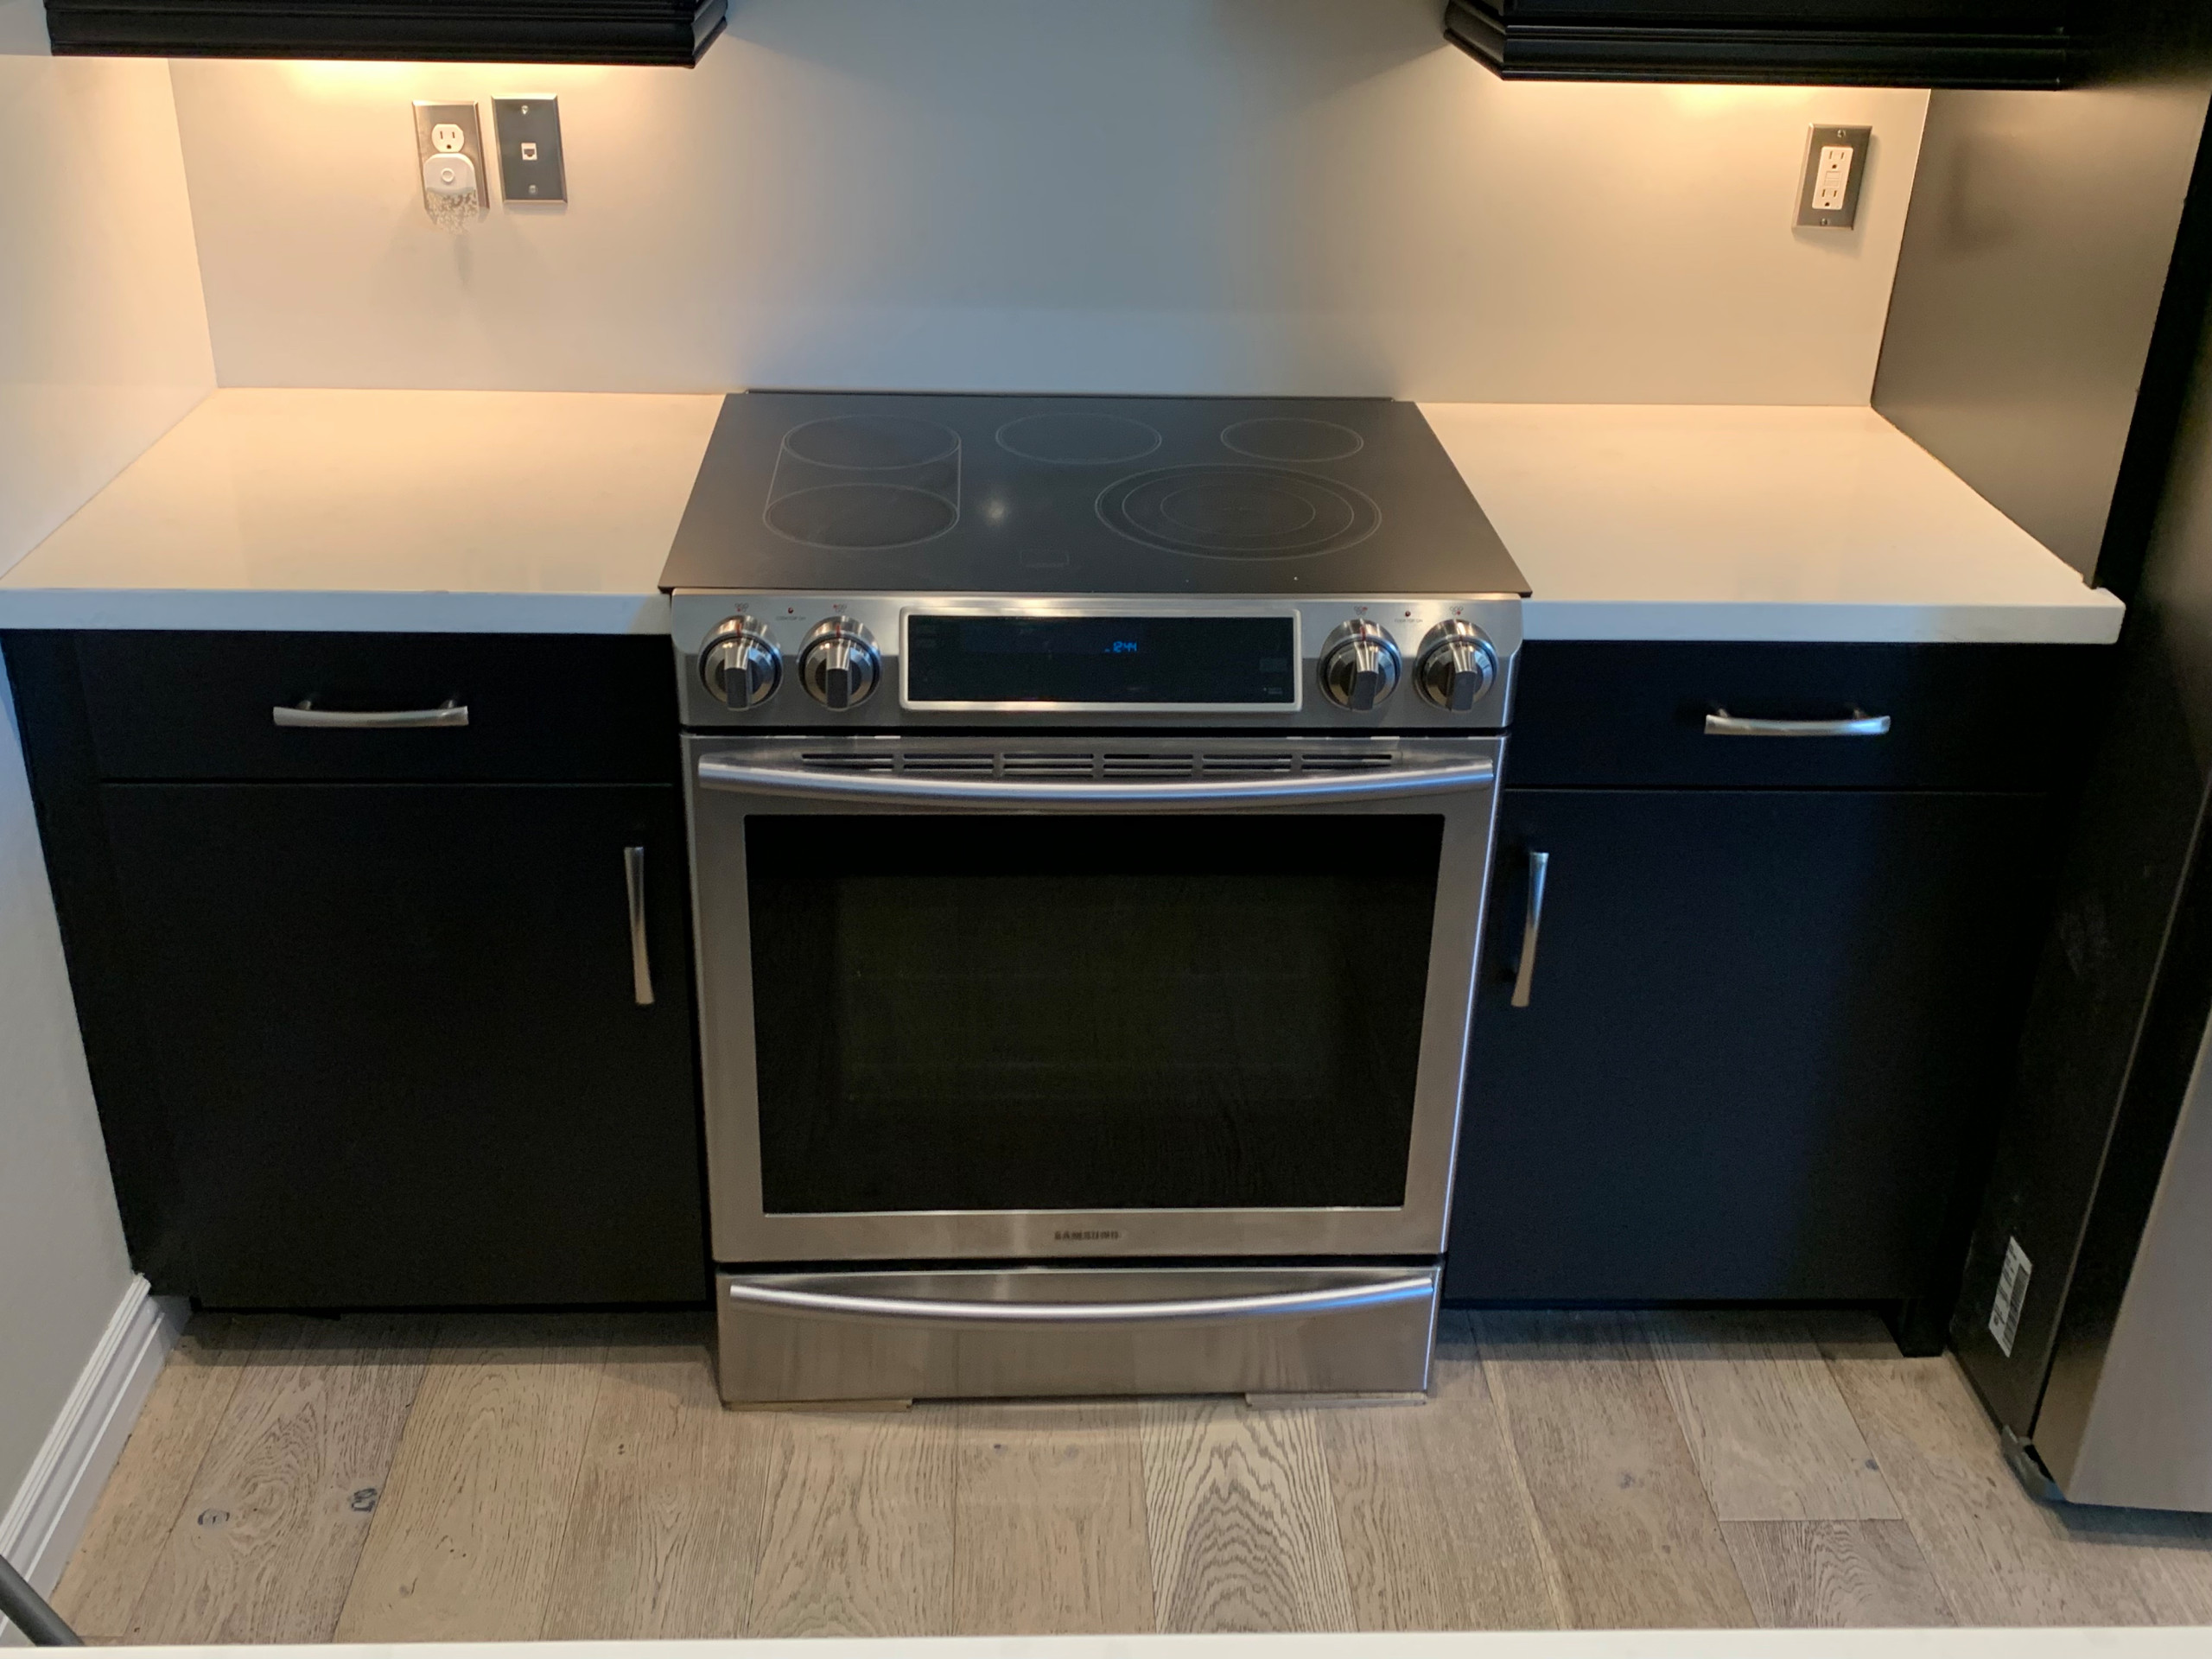 Black Painted Kitchen Cabinetry